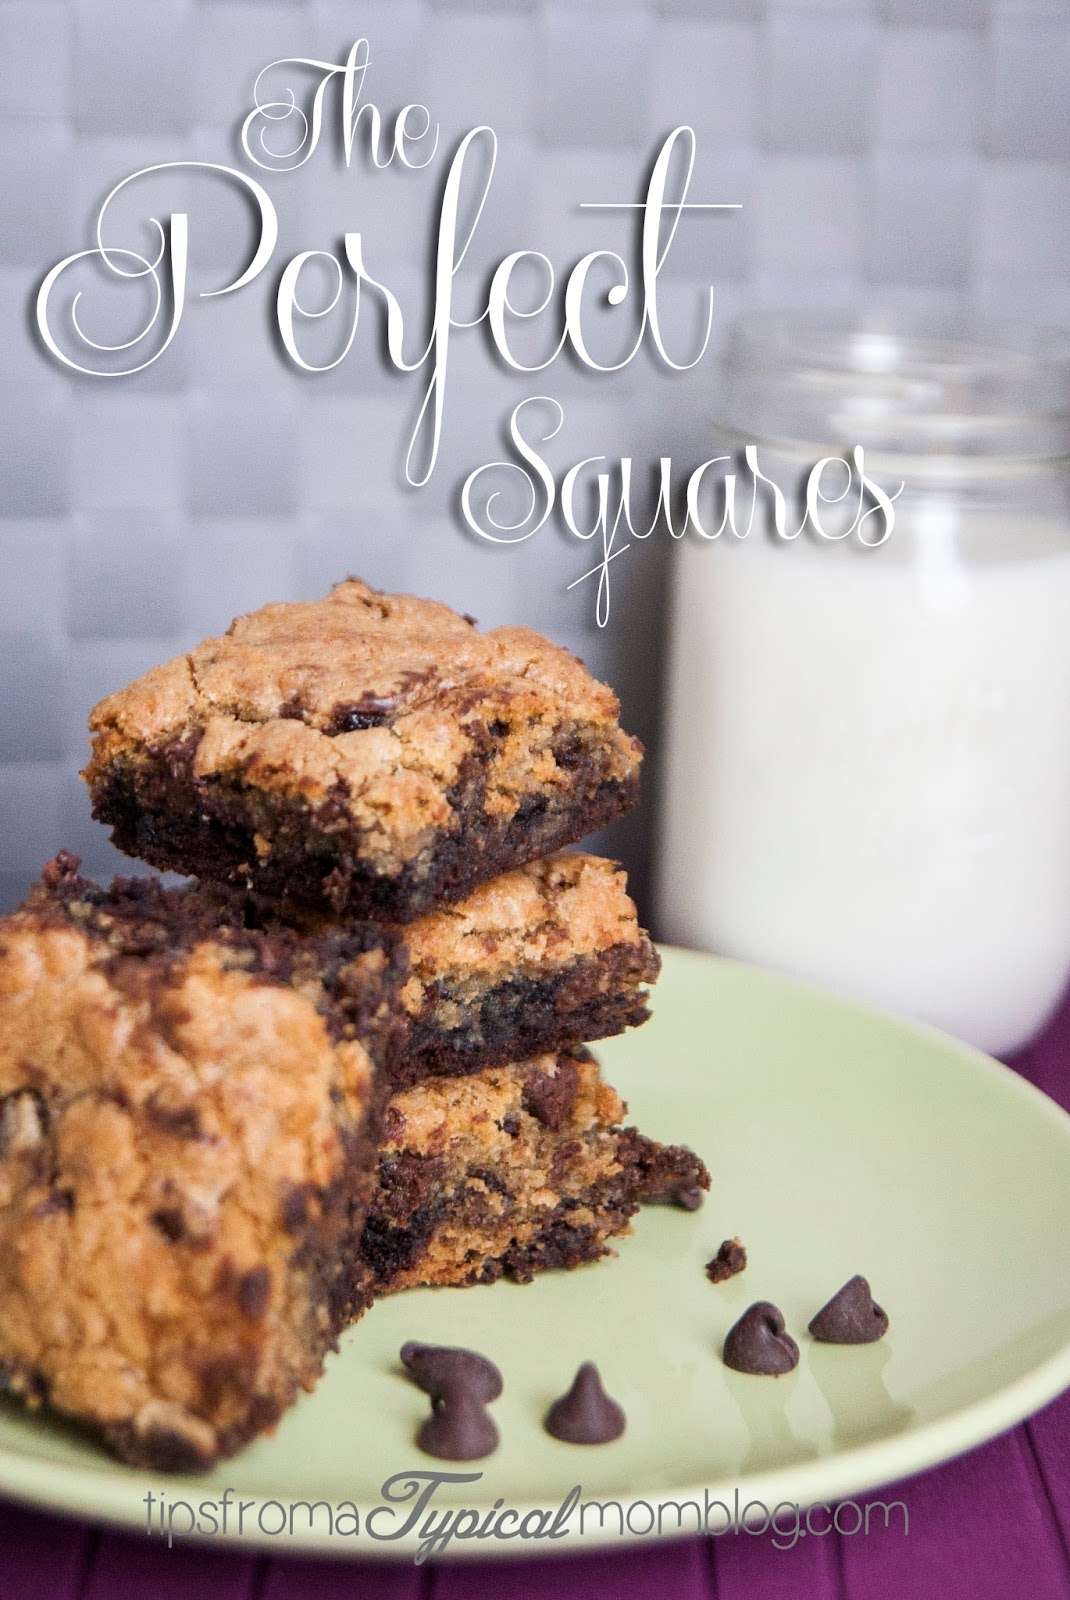 The Perfect Squares- Layered Chocolate Chip Cookie and Brownie Bars. Recipe from Tips From a Typical Mom.